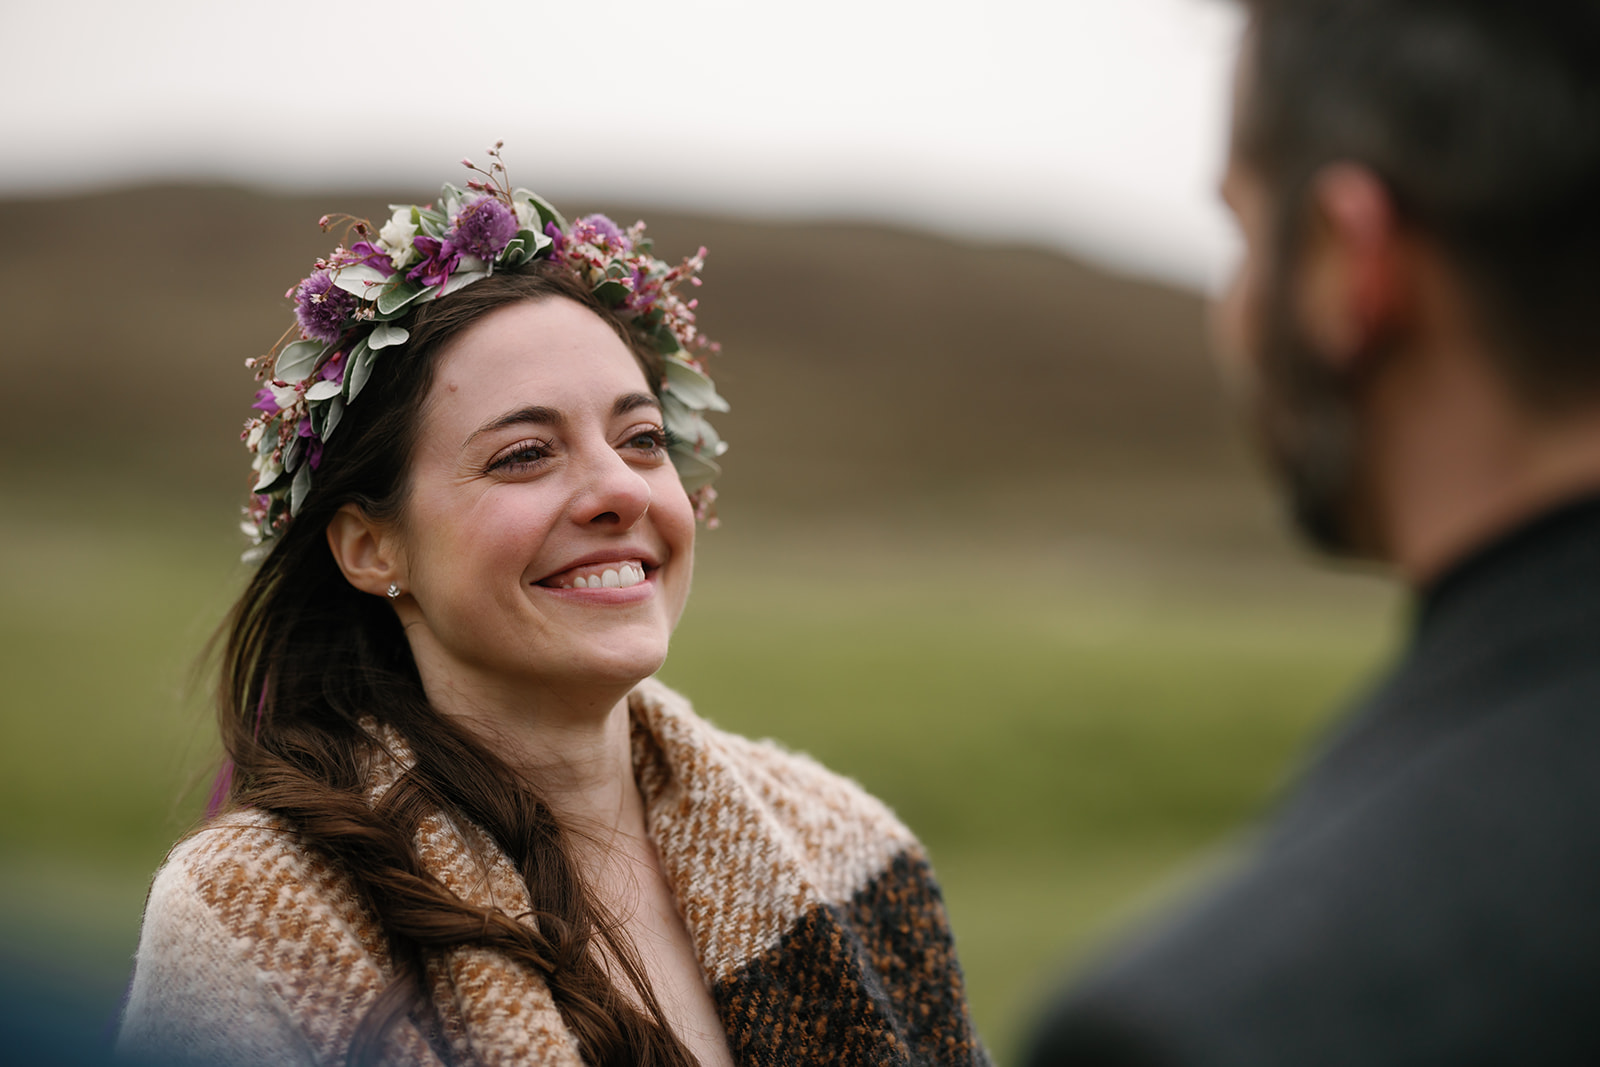 A genuine smile lights up Becca's face as she turns to see Nick for the first time during their Isle of Skye elopement